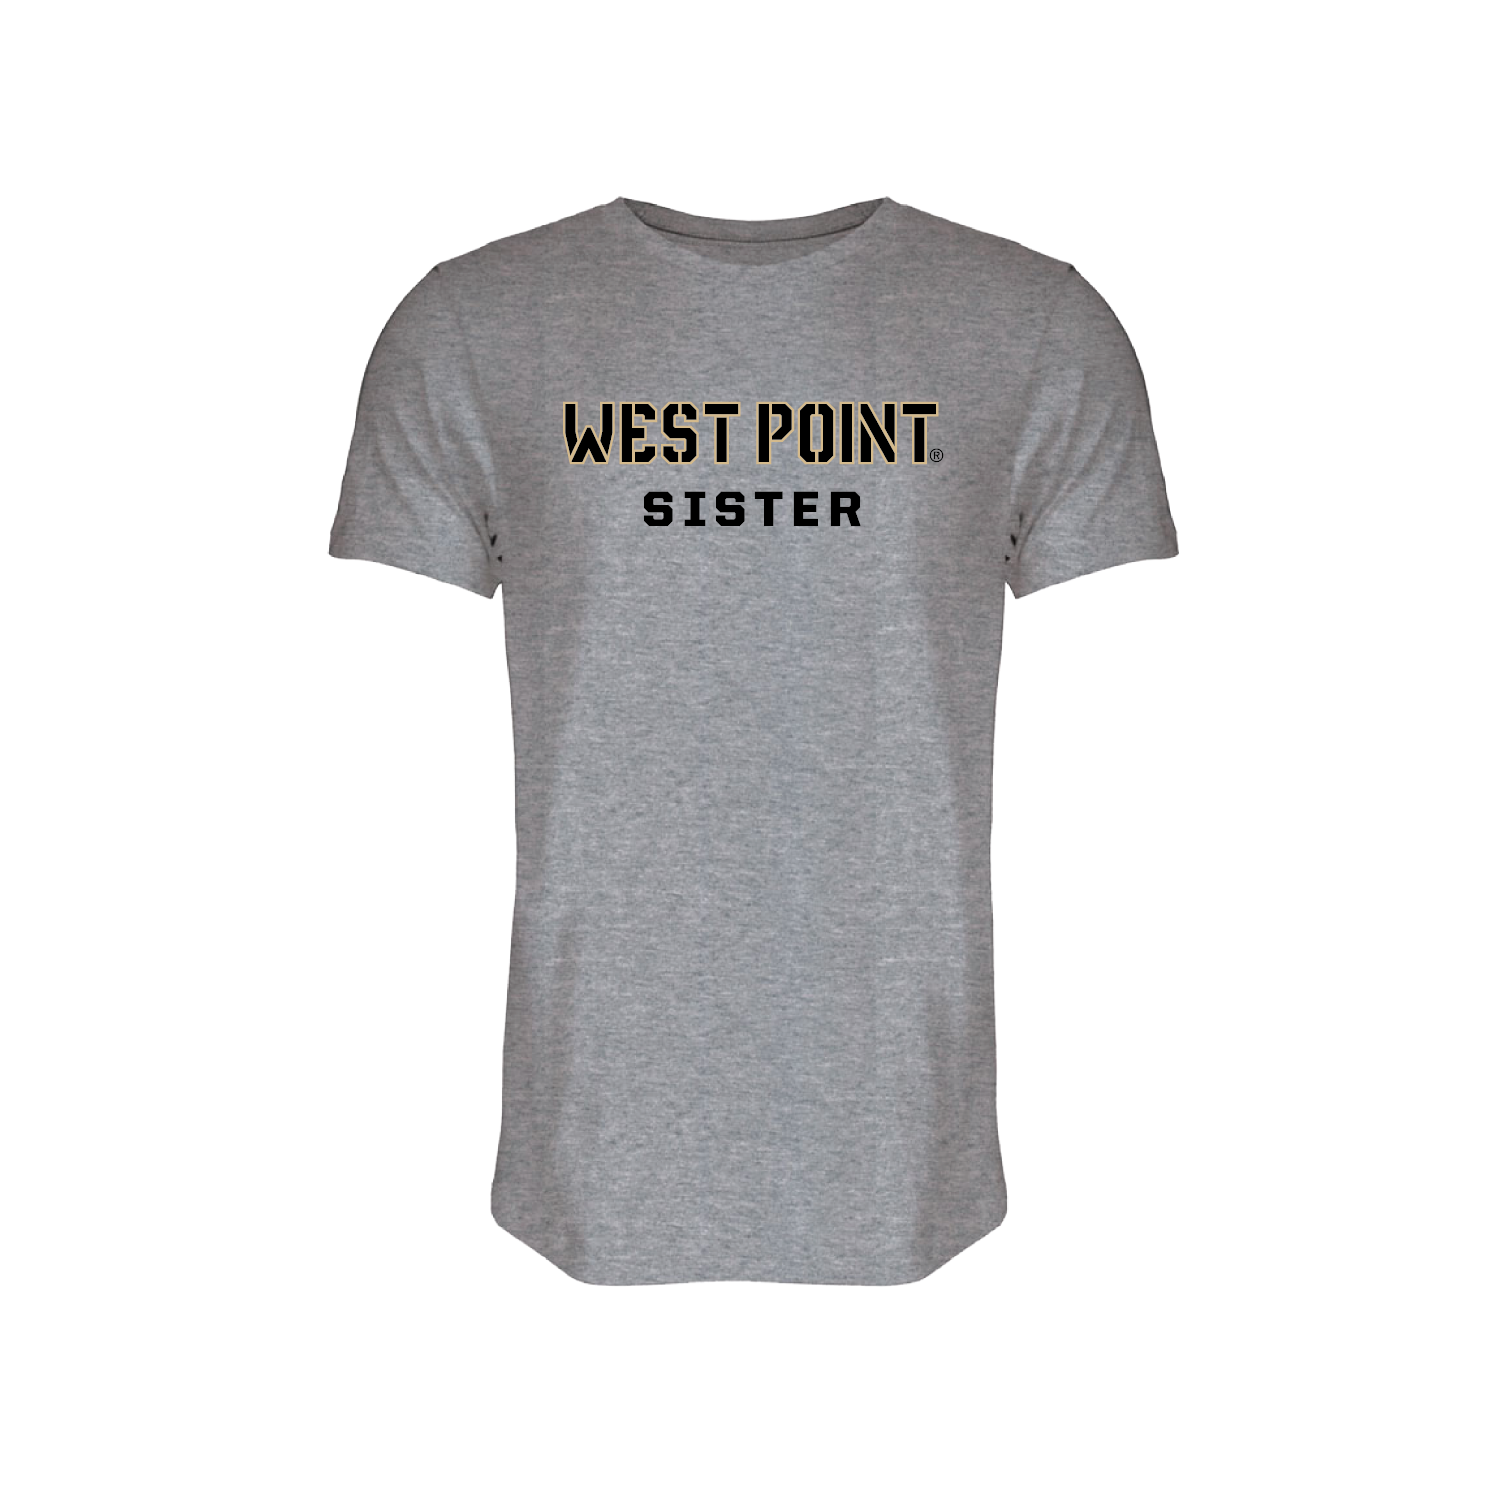 WPPC GA_H GRY WP Sister Tee_Front